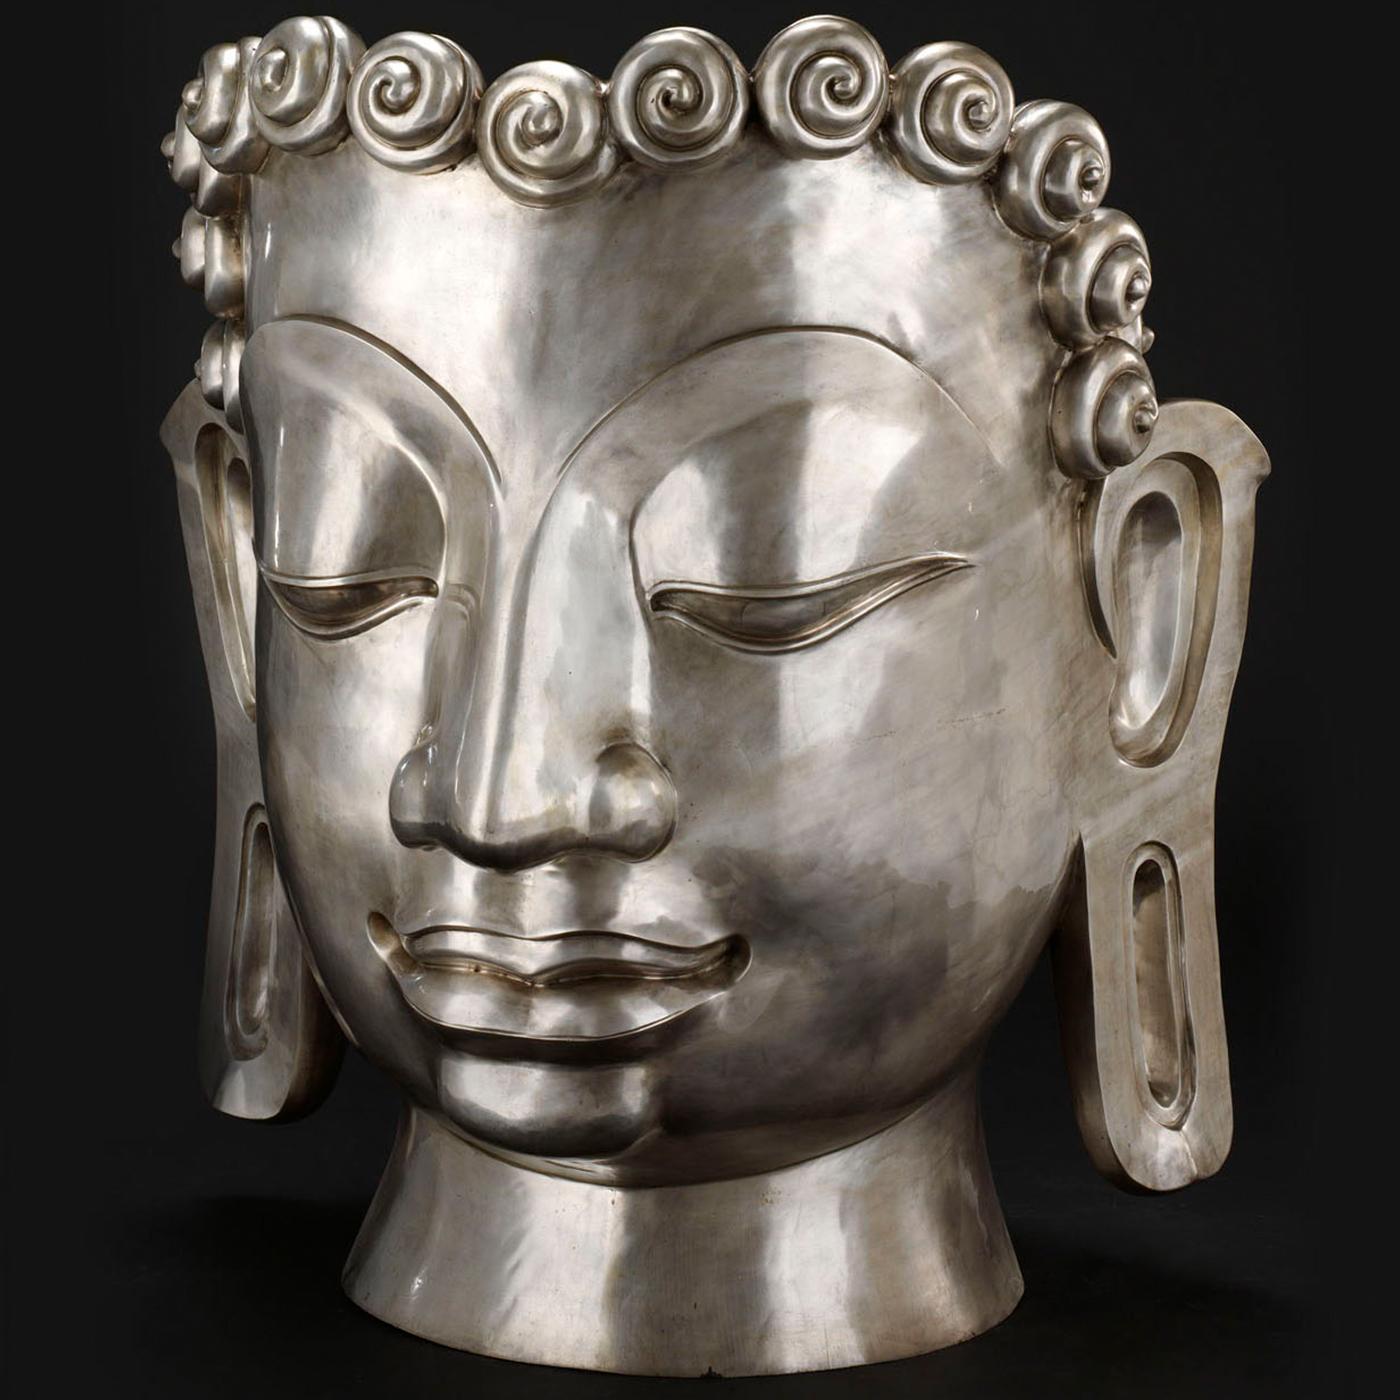 A superb showcase of deft craftsmanship, this objet d'art is masterfully handmade of molten bronze using traditional, age-old techniques. Reproducing the elegant likeness of Buddha with closed eyes, this mask features a crown of little roses